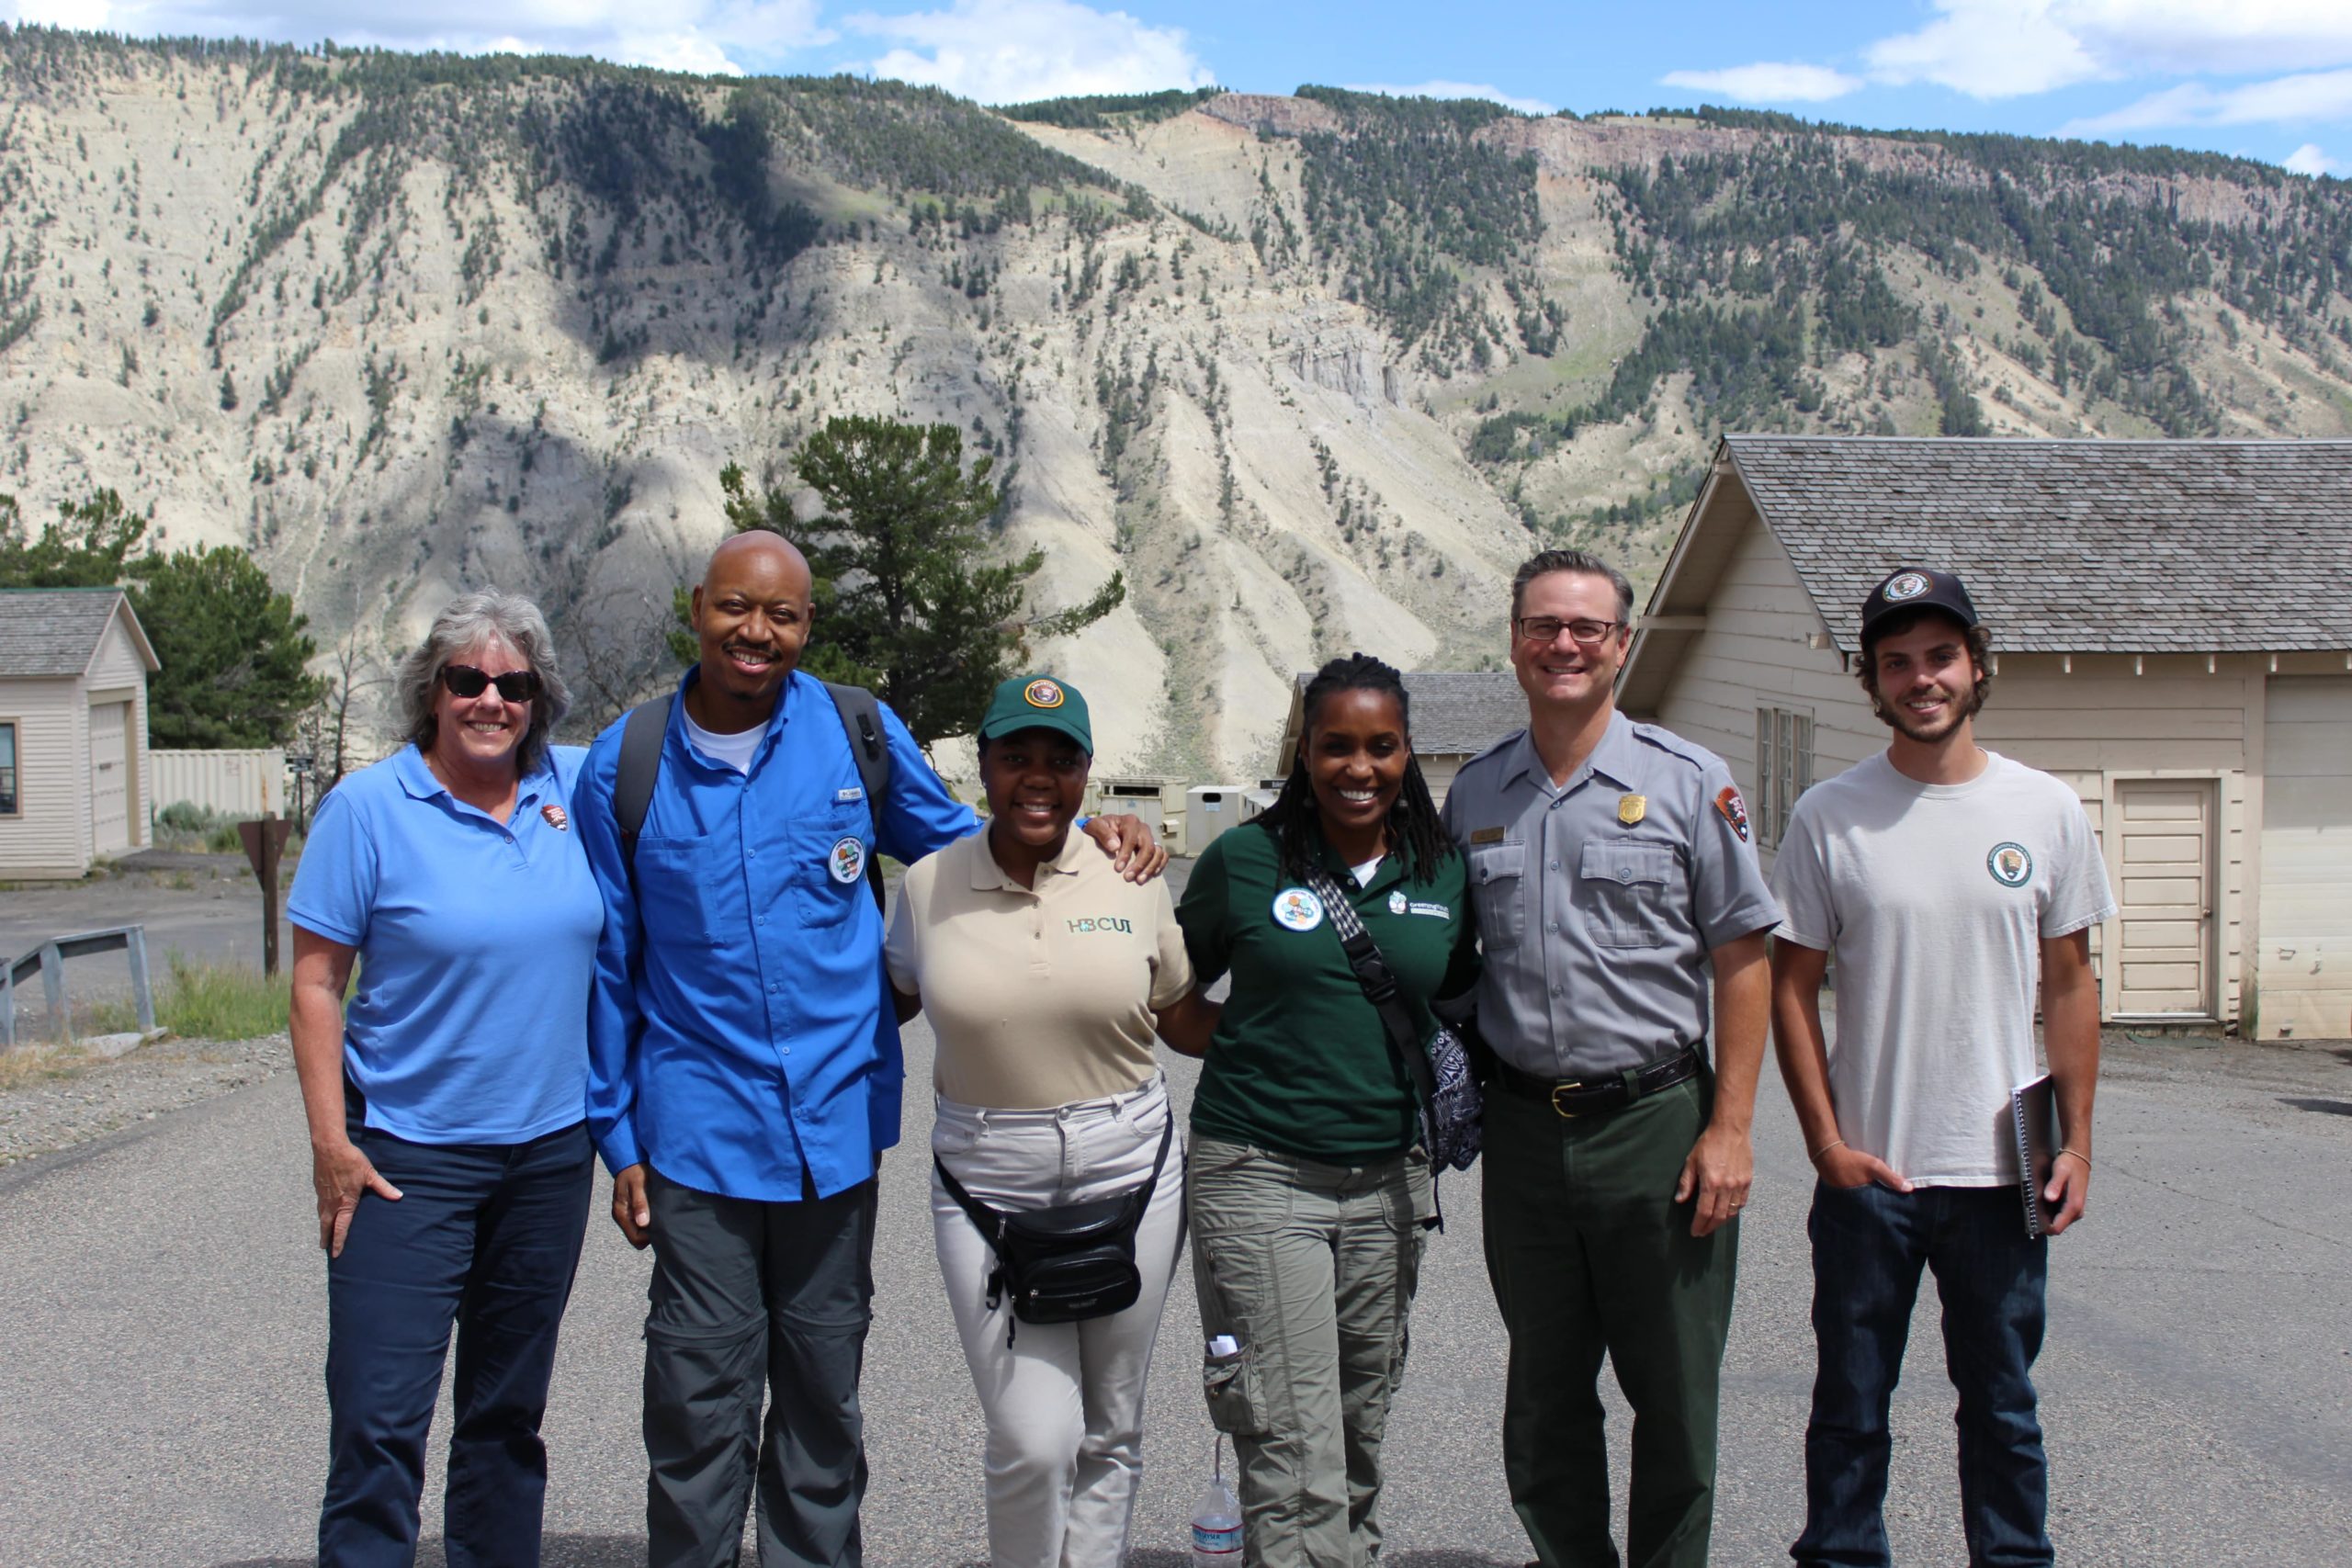 Angelou poses for the camera with five other NPS people. They are smiling and standing in a line in front of big rock walls in the background.